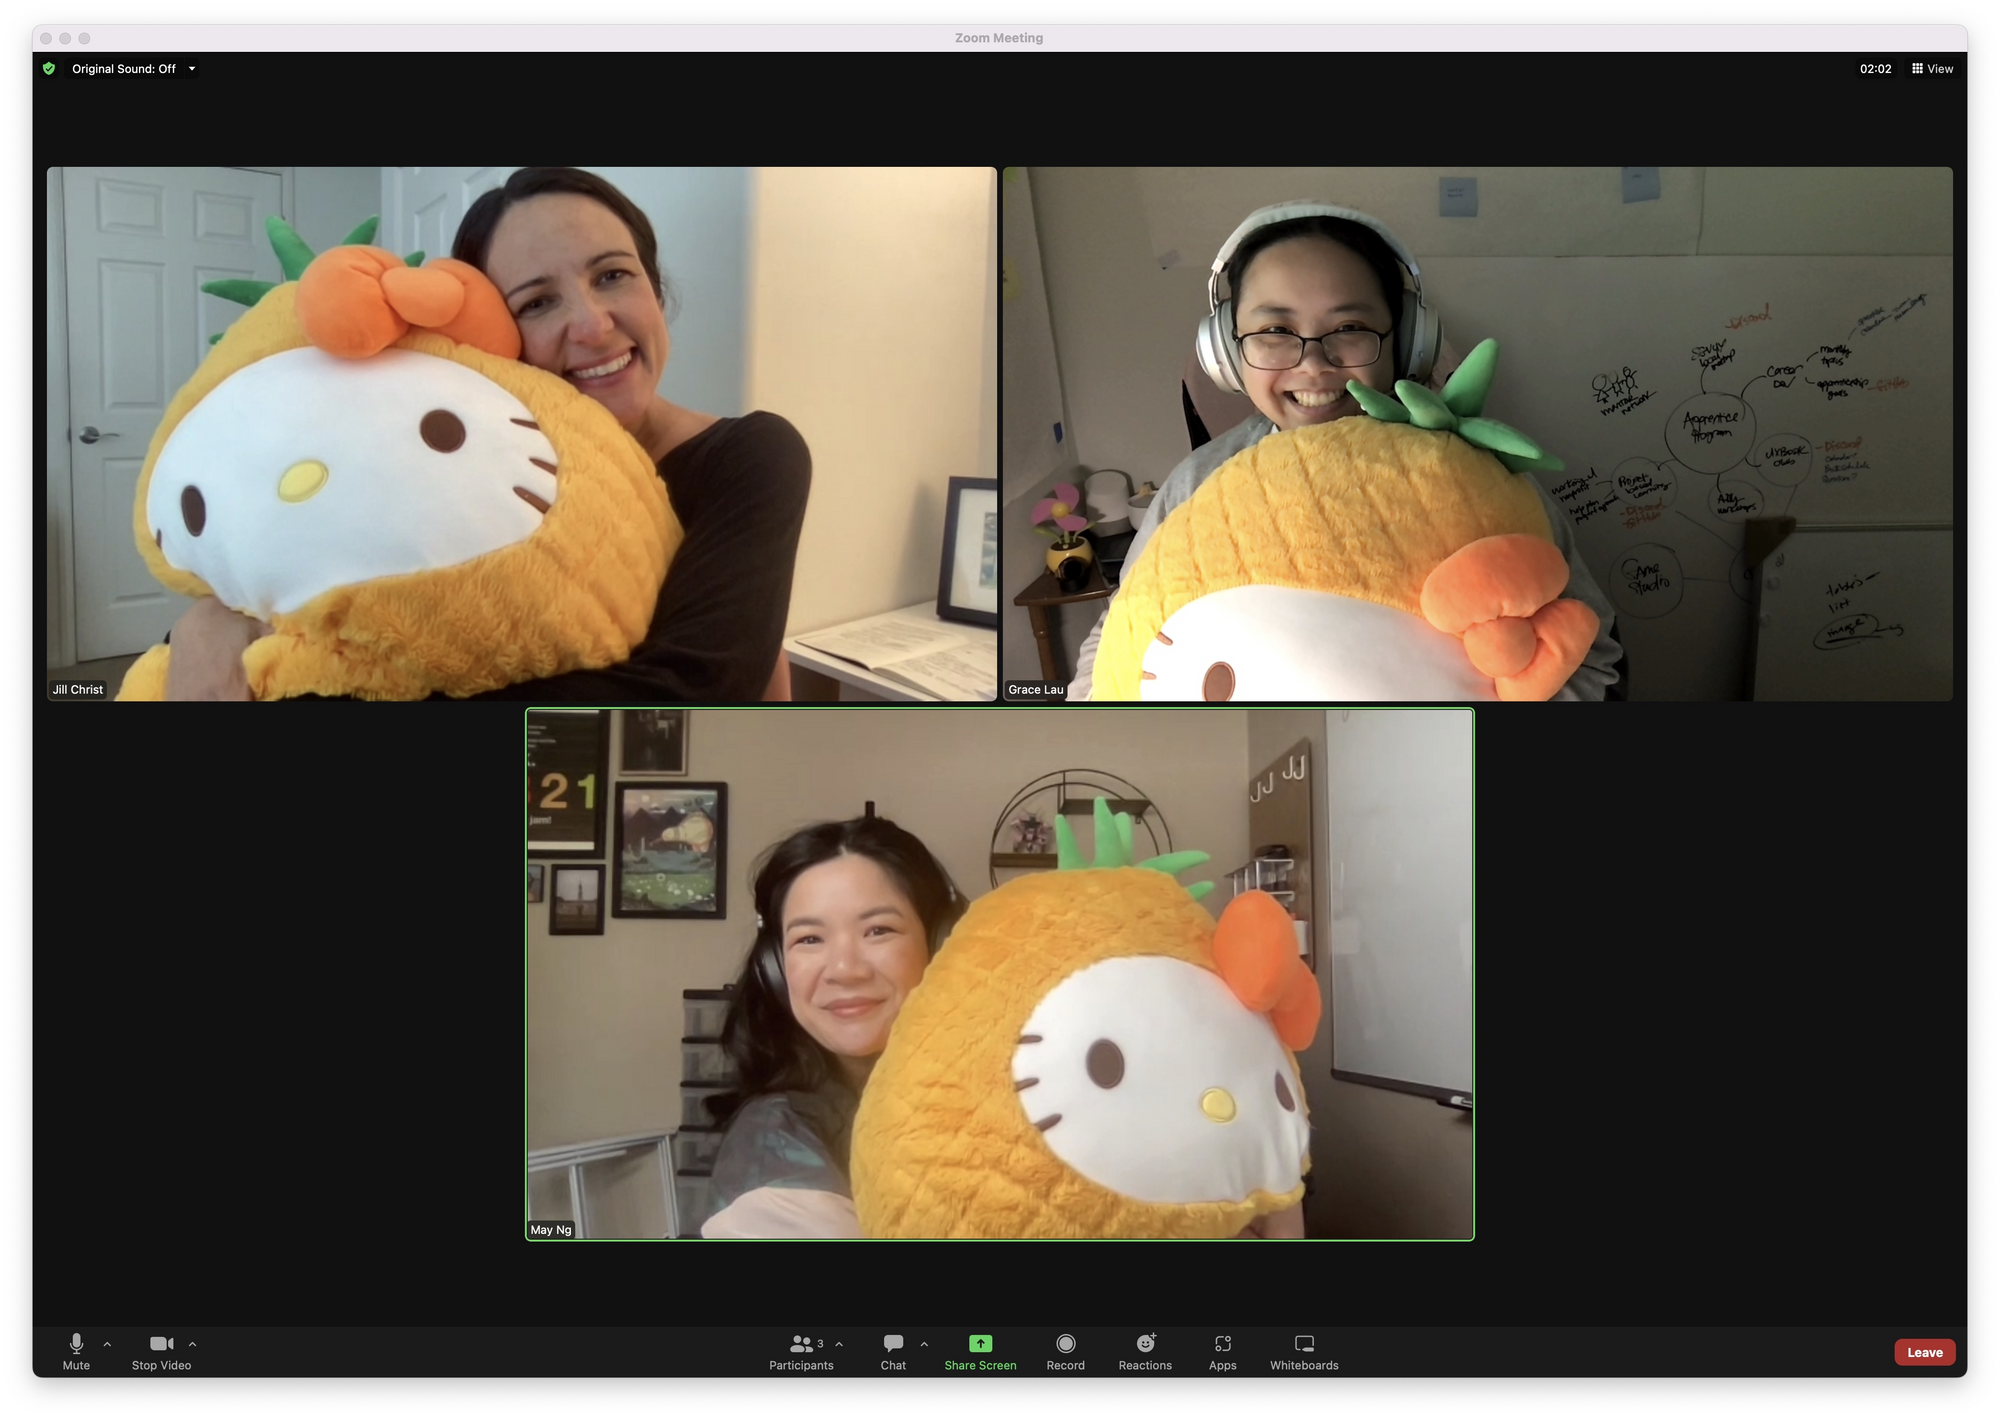 Jill’s last mentoring session with May ft. Grace! Everyone’s holding a Squishmallow we’ve affectionately named Bolo Mao (Pineapple Kitty). New DIA mascot…?